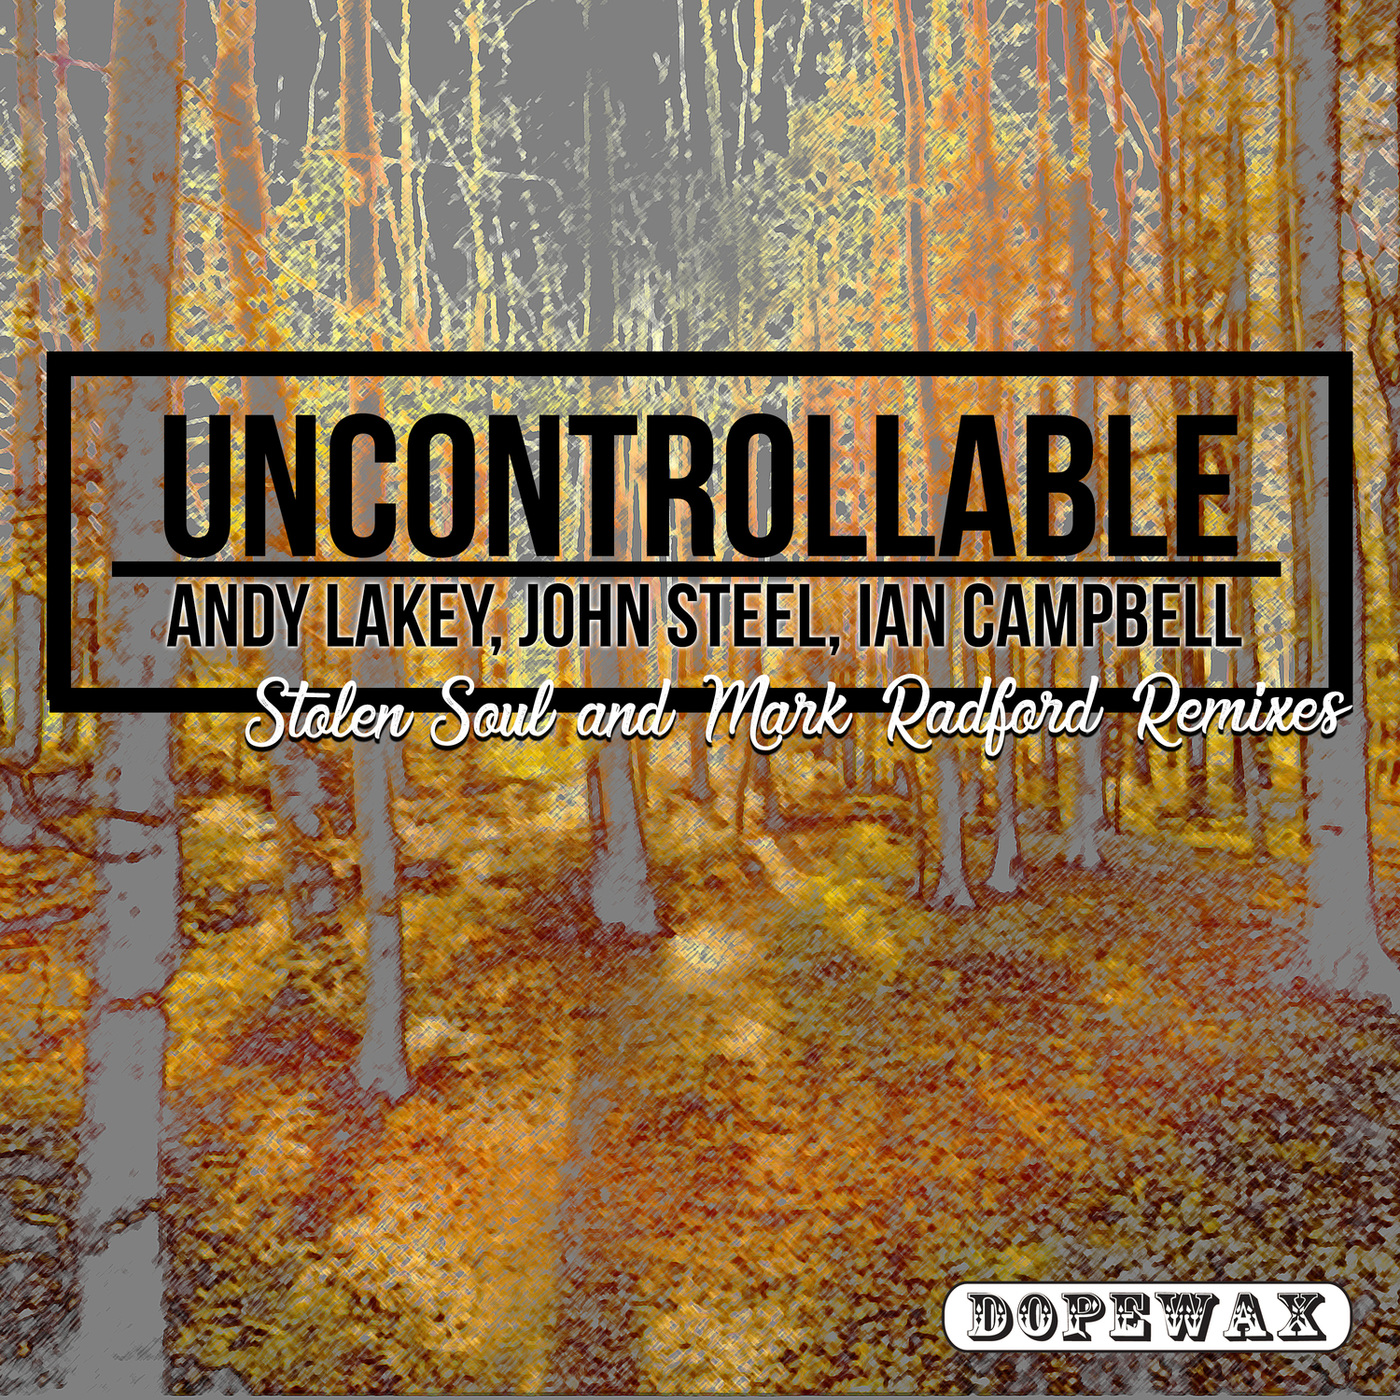 Andy Lakey, John Steel, Ian Campbell - Uncontrollable / Dopewax Records